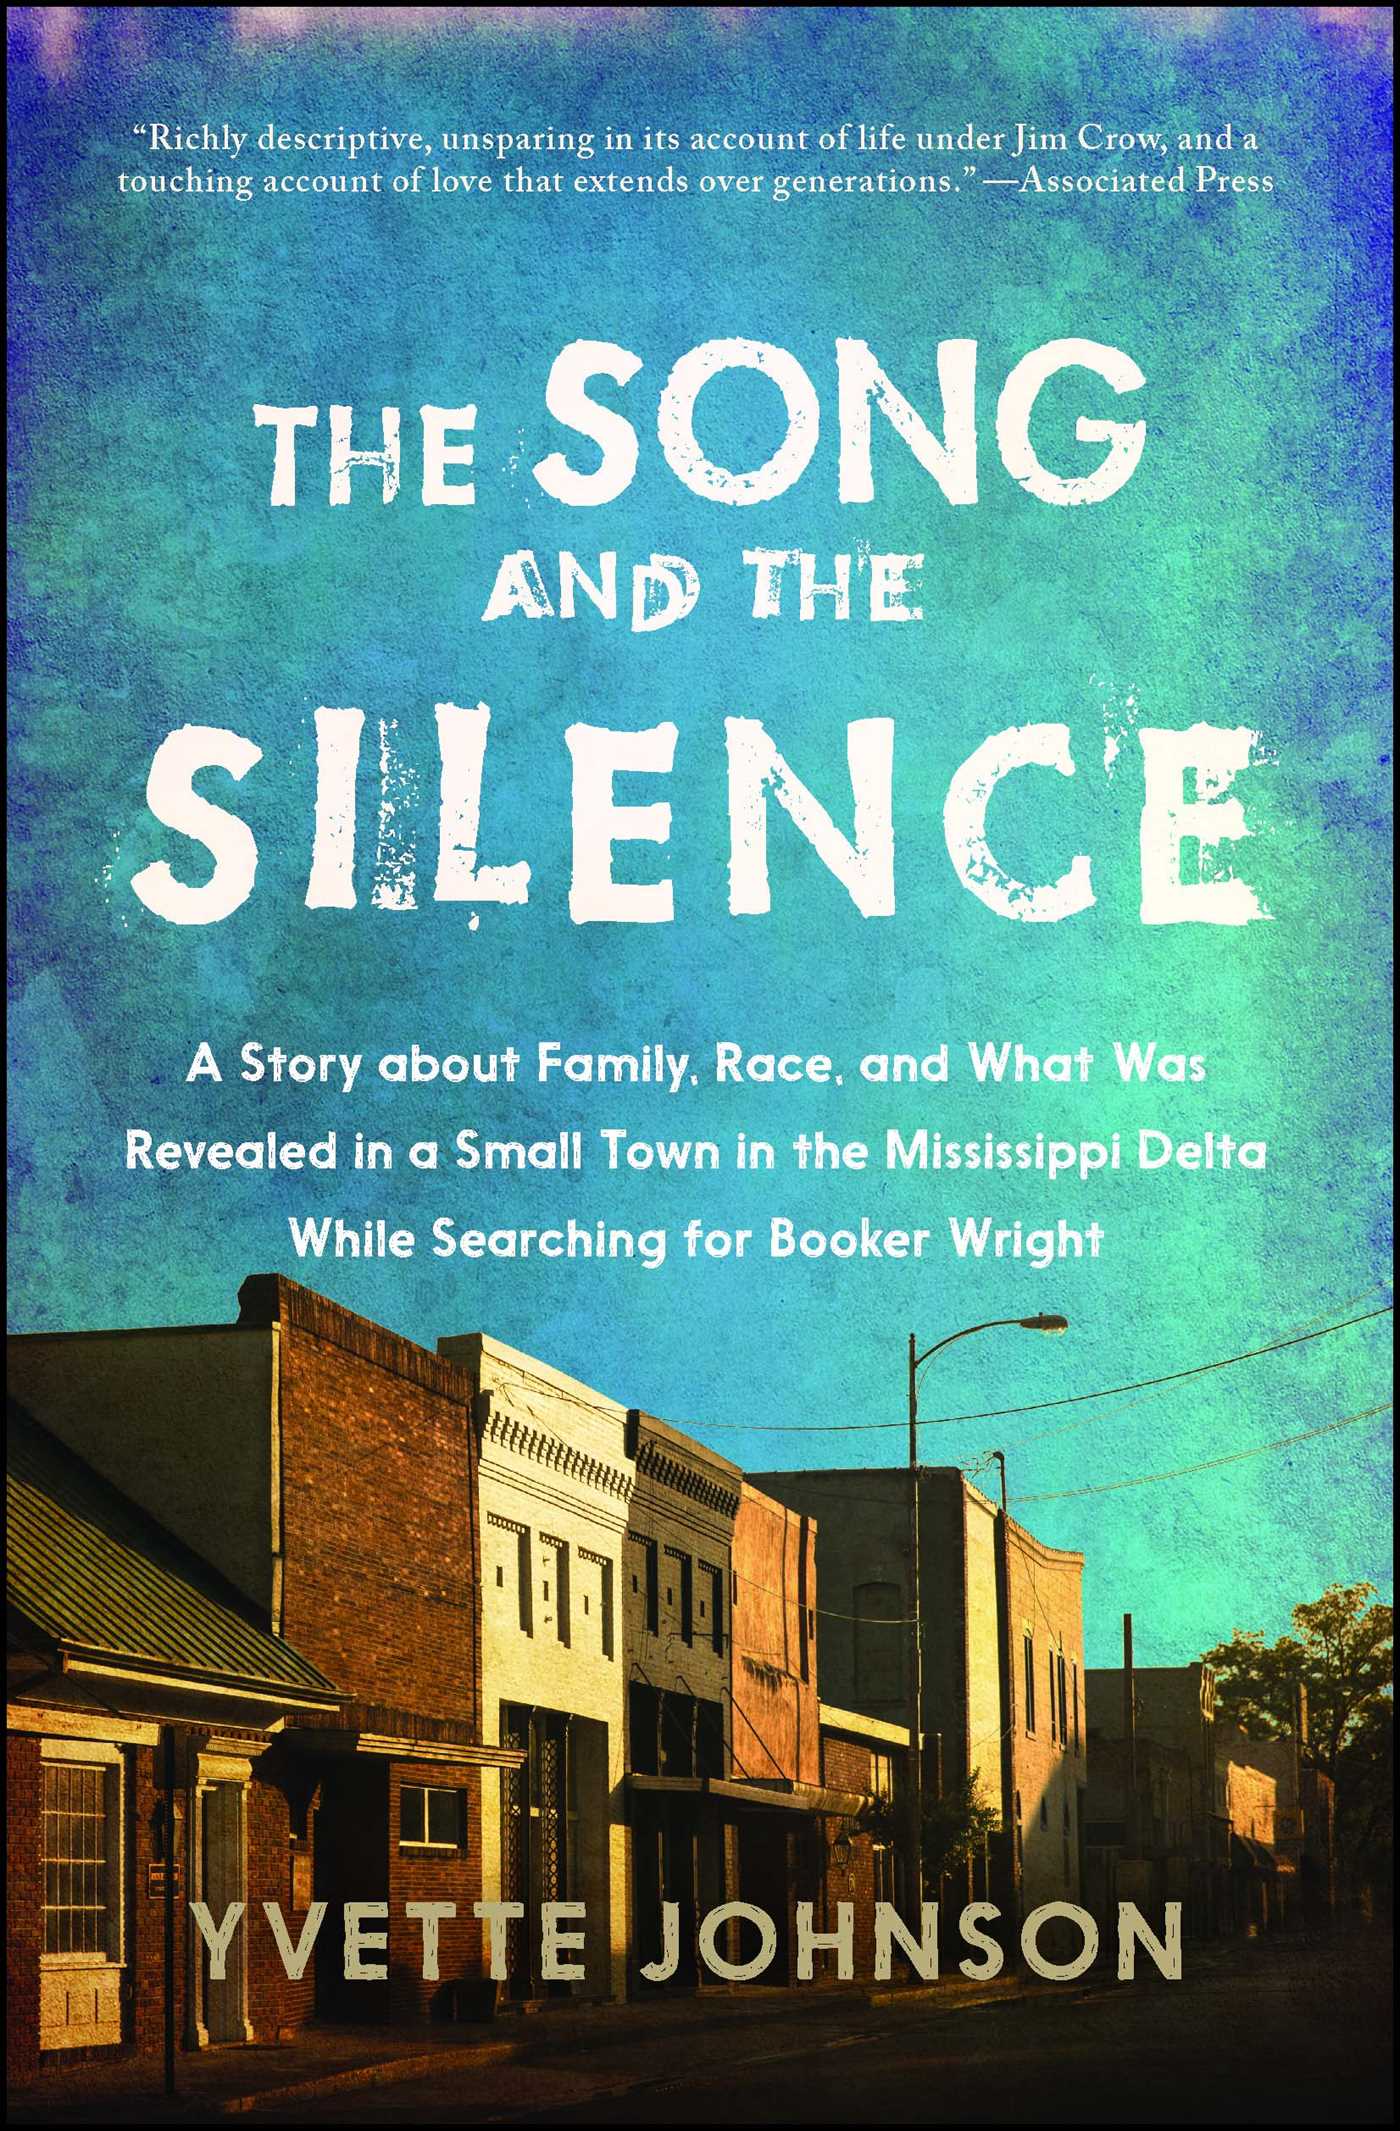 Image for "The Song and the Silence"